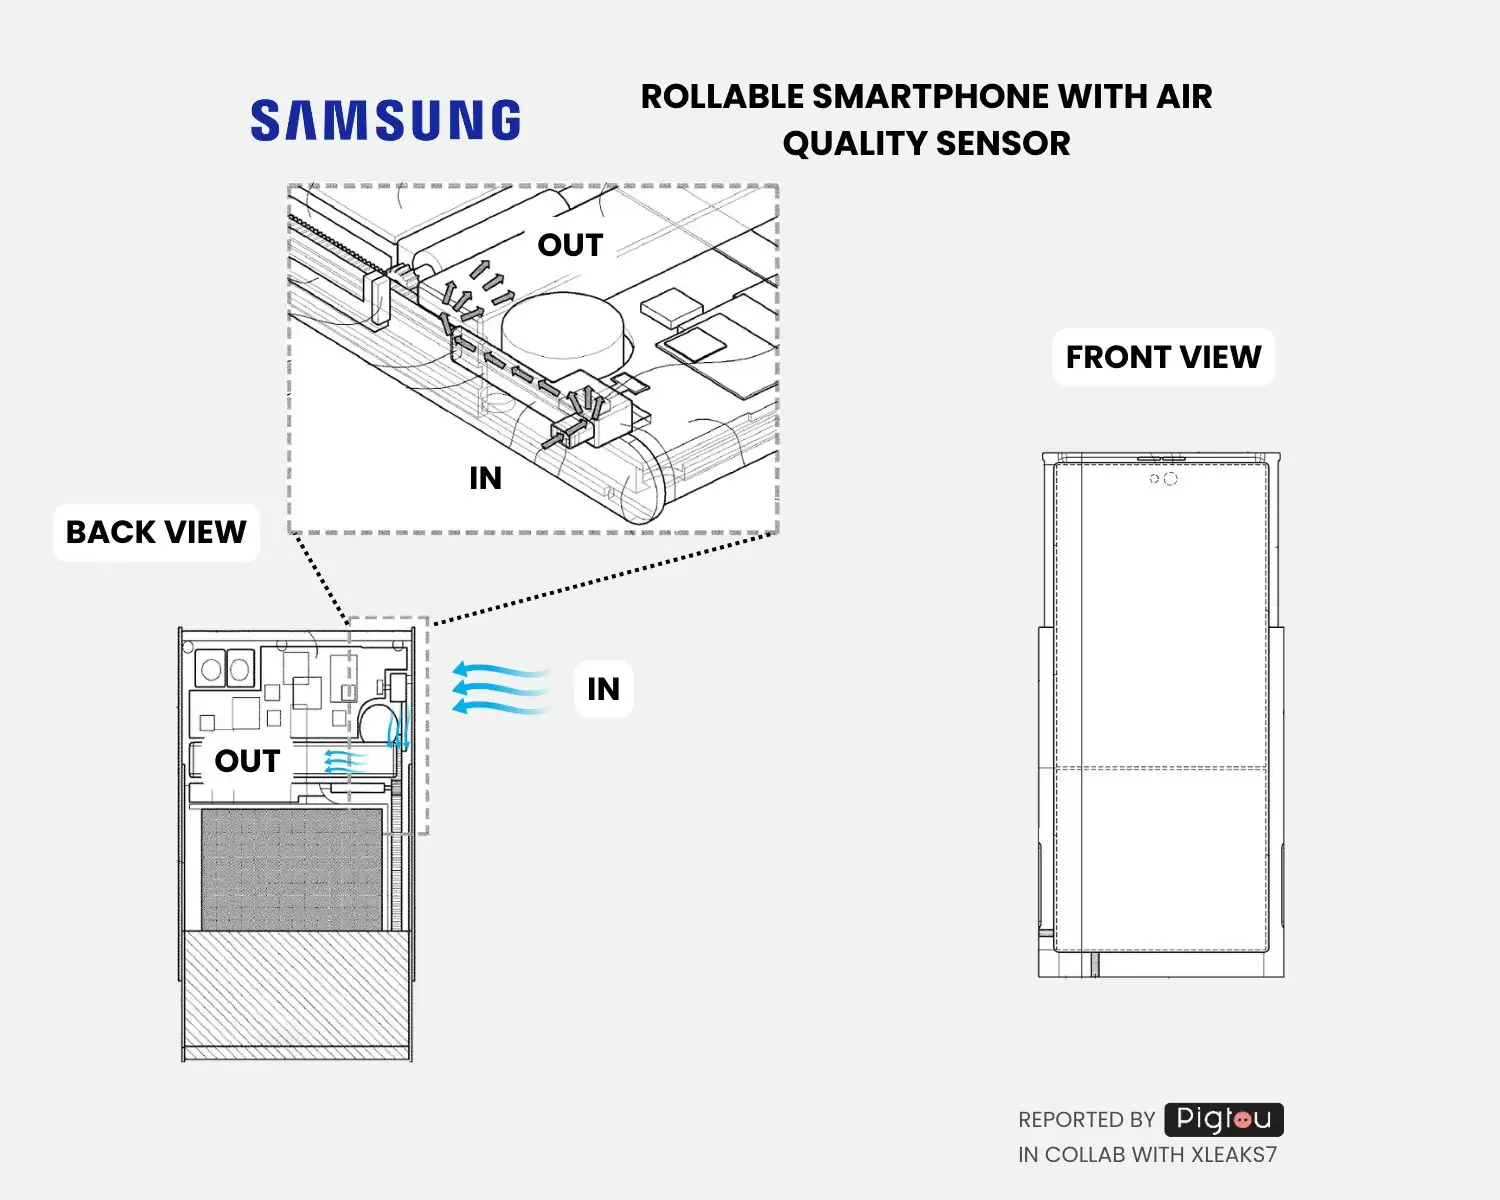 Samsung Rollable